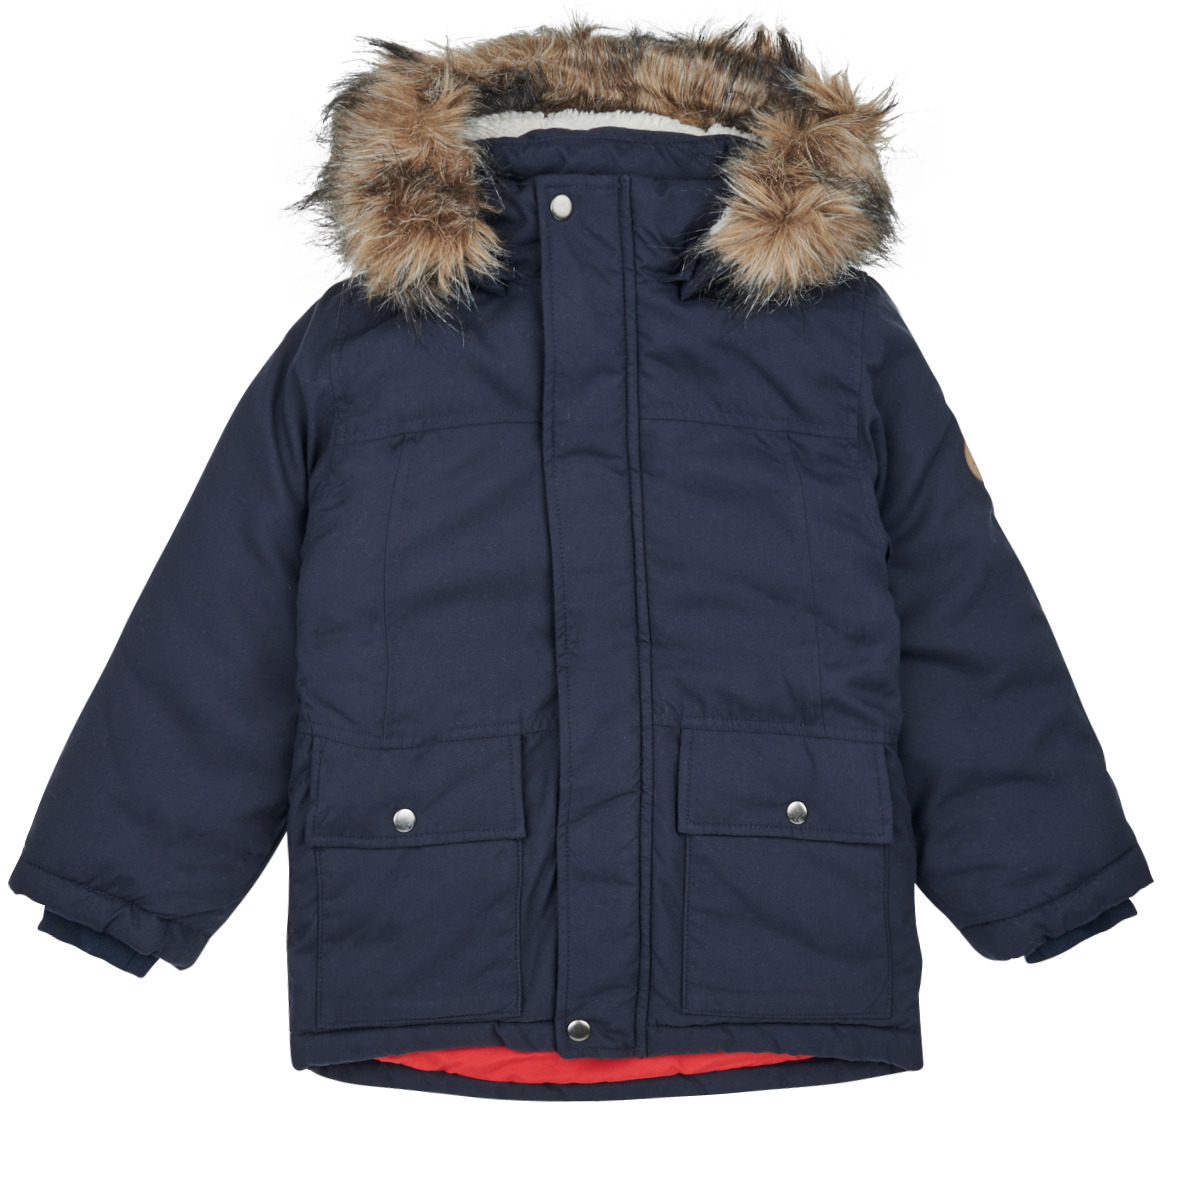 Name it Parkas Marine Clothing delivery - JACKET Free ! PB Spartoo - SOUTH | NKMMARLIN NET Child PARKA